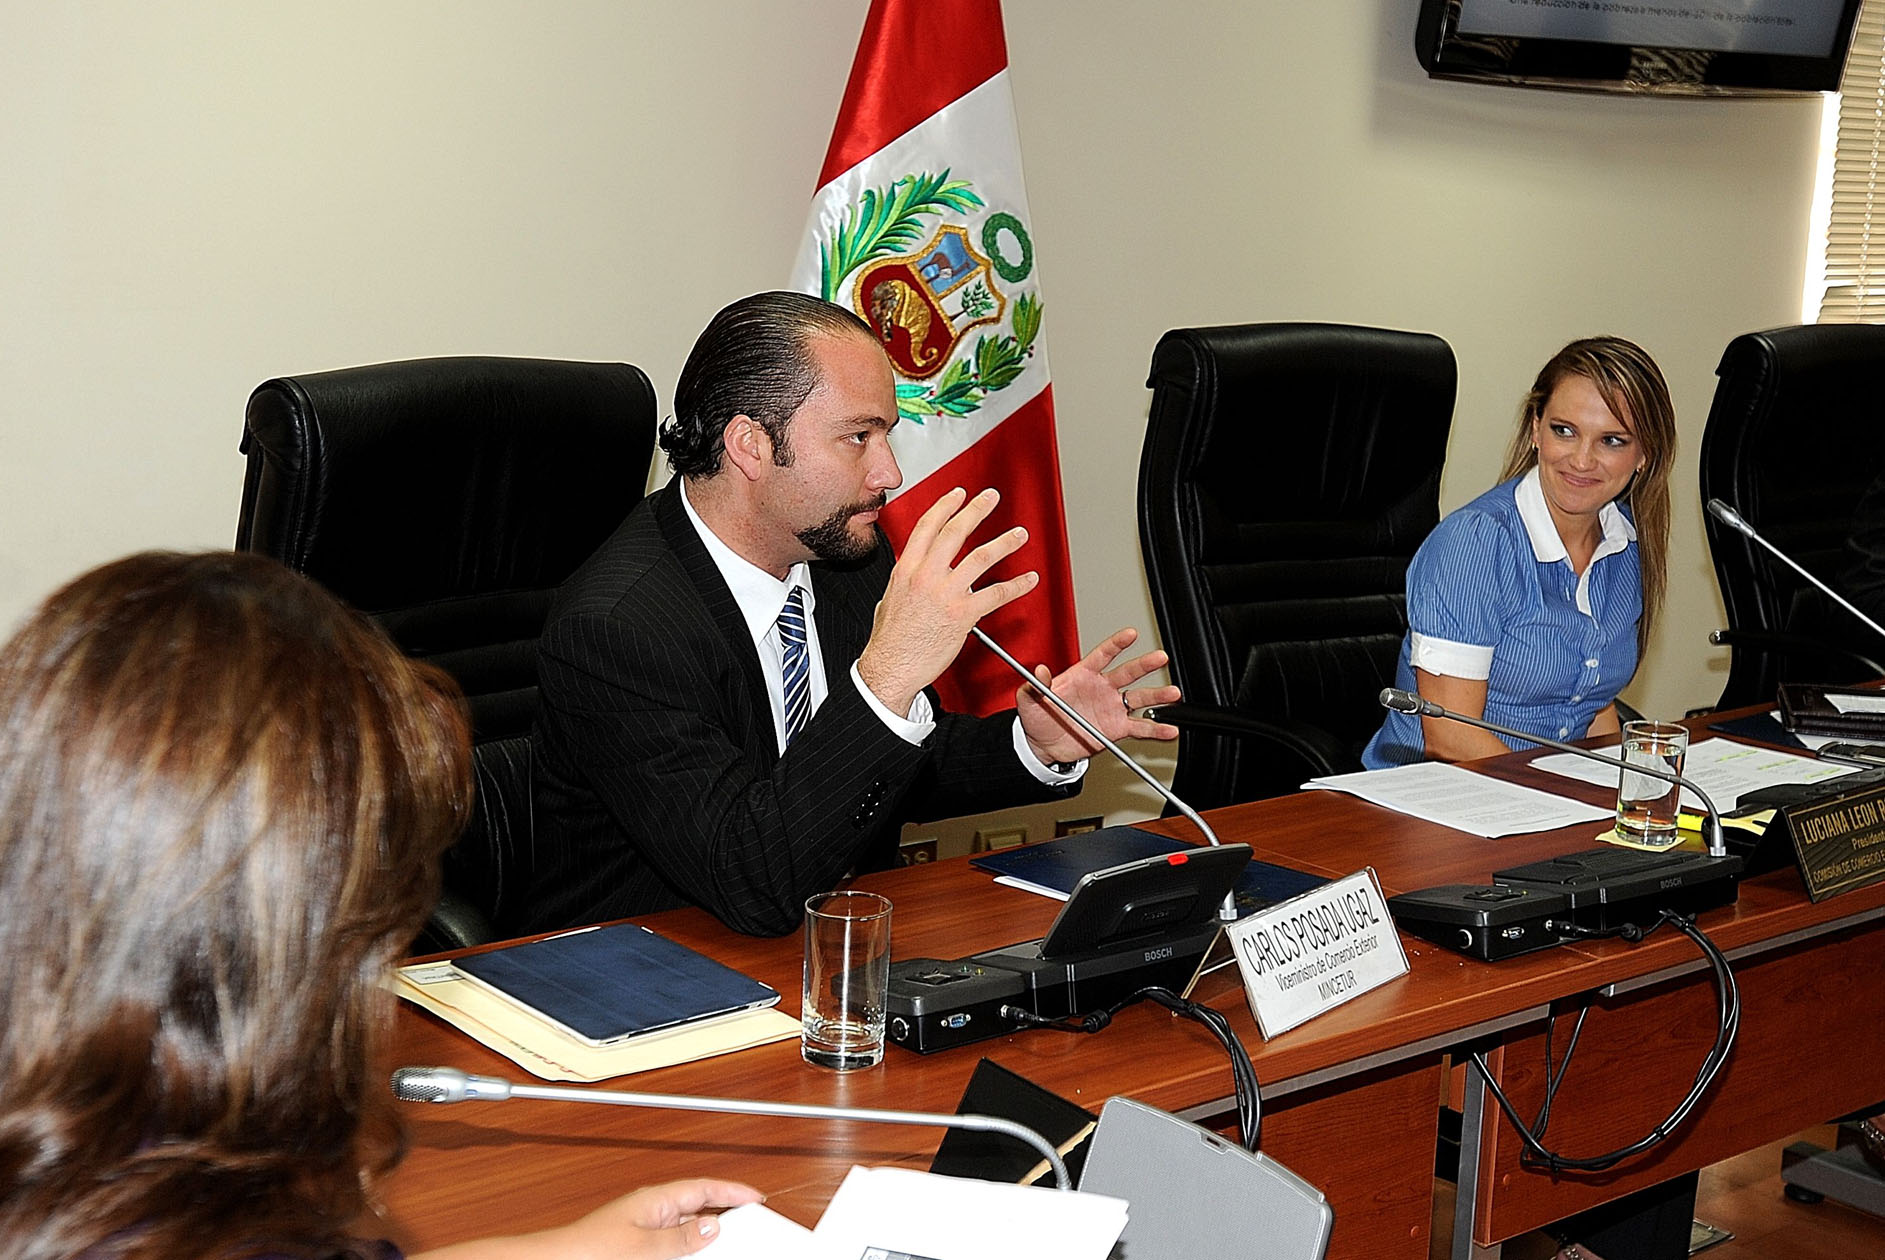 a man speaking into microphones in front of two women and a man sitting at desk